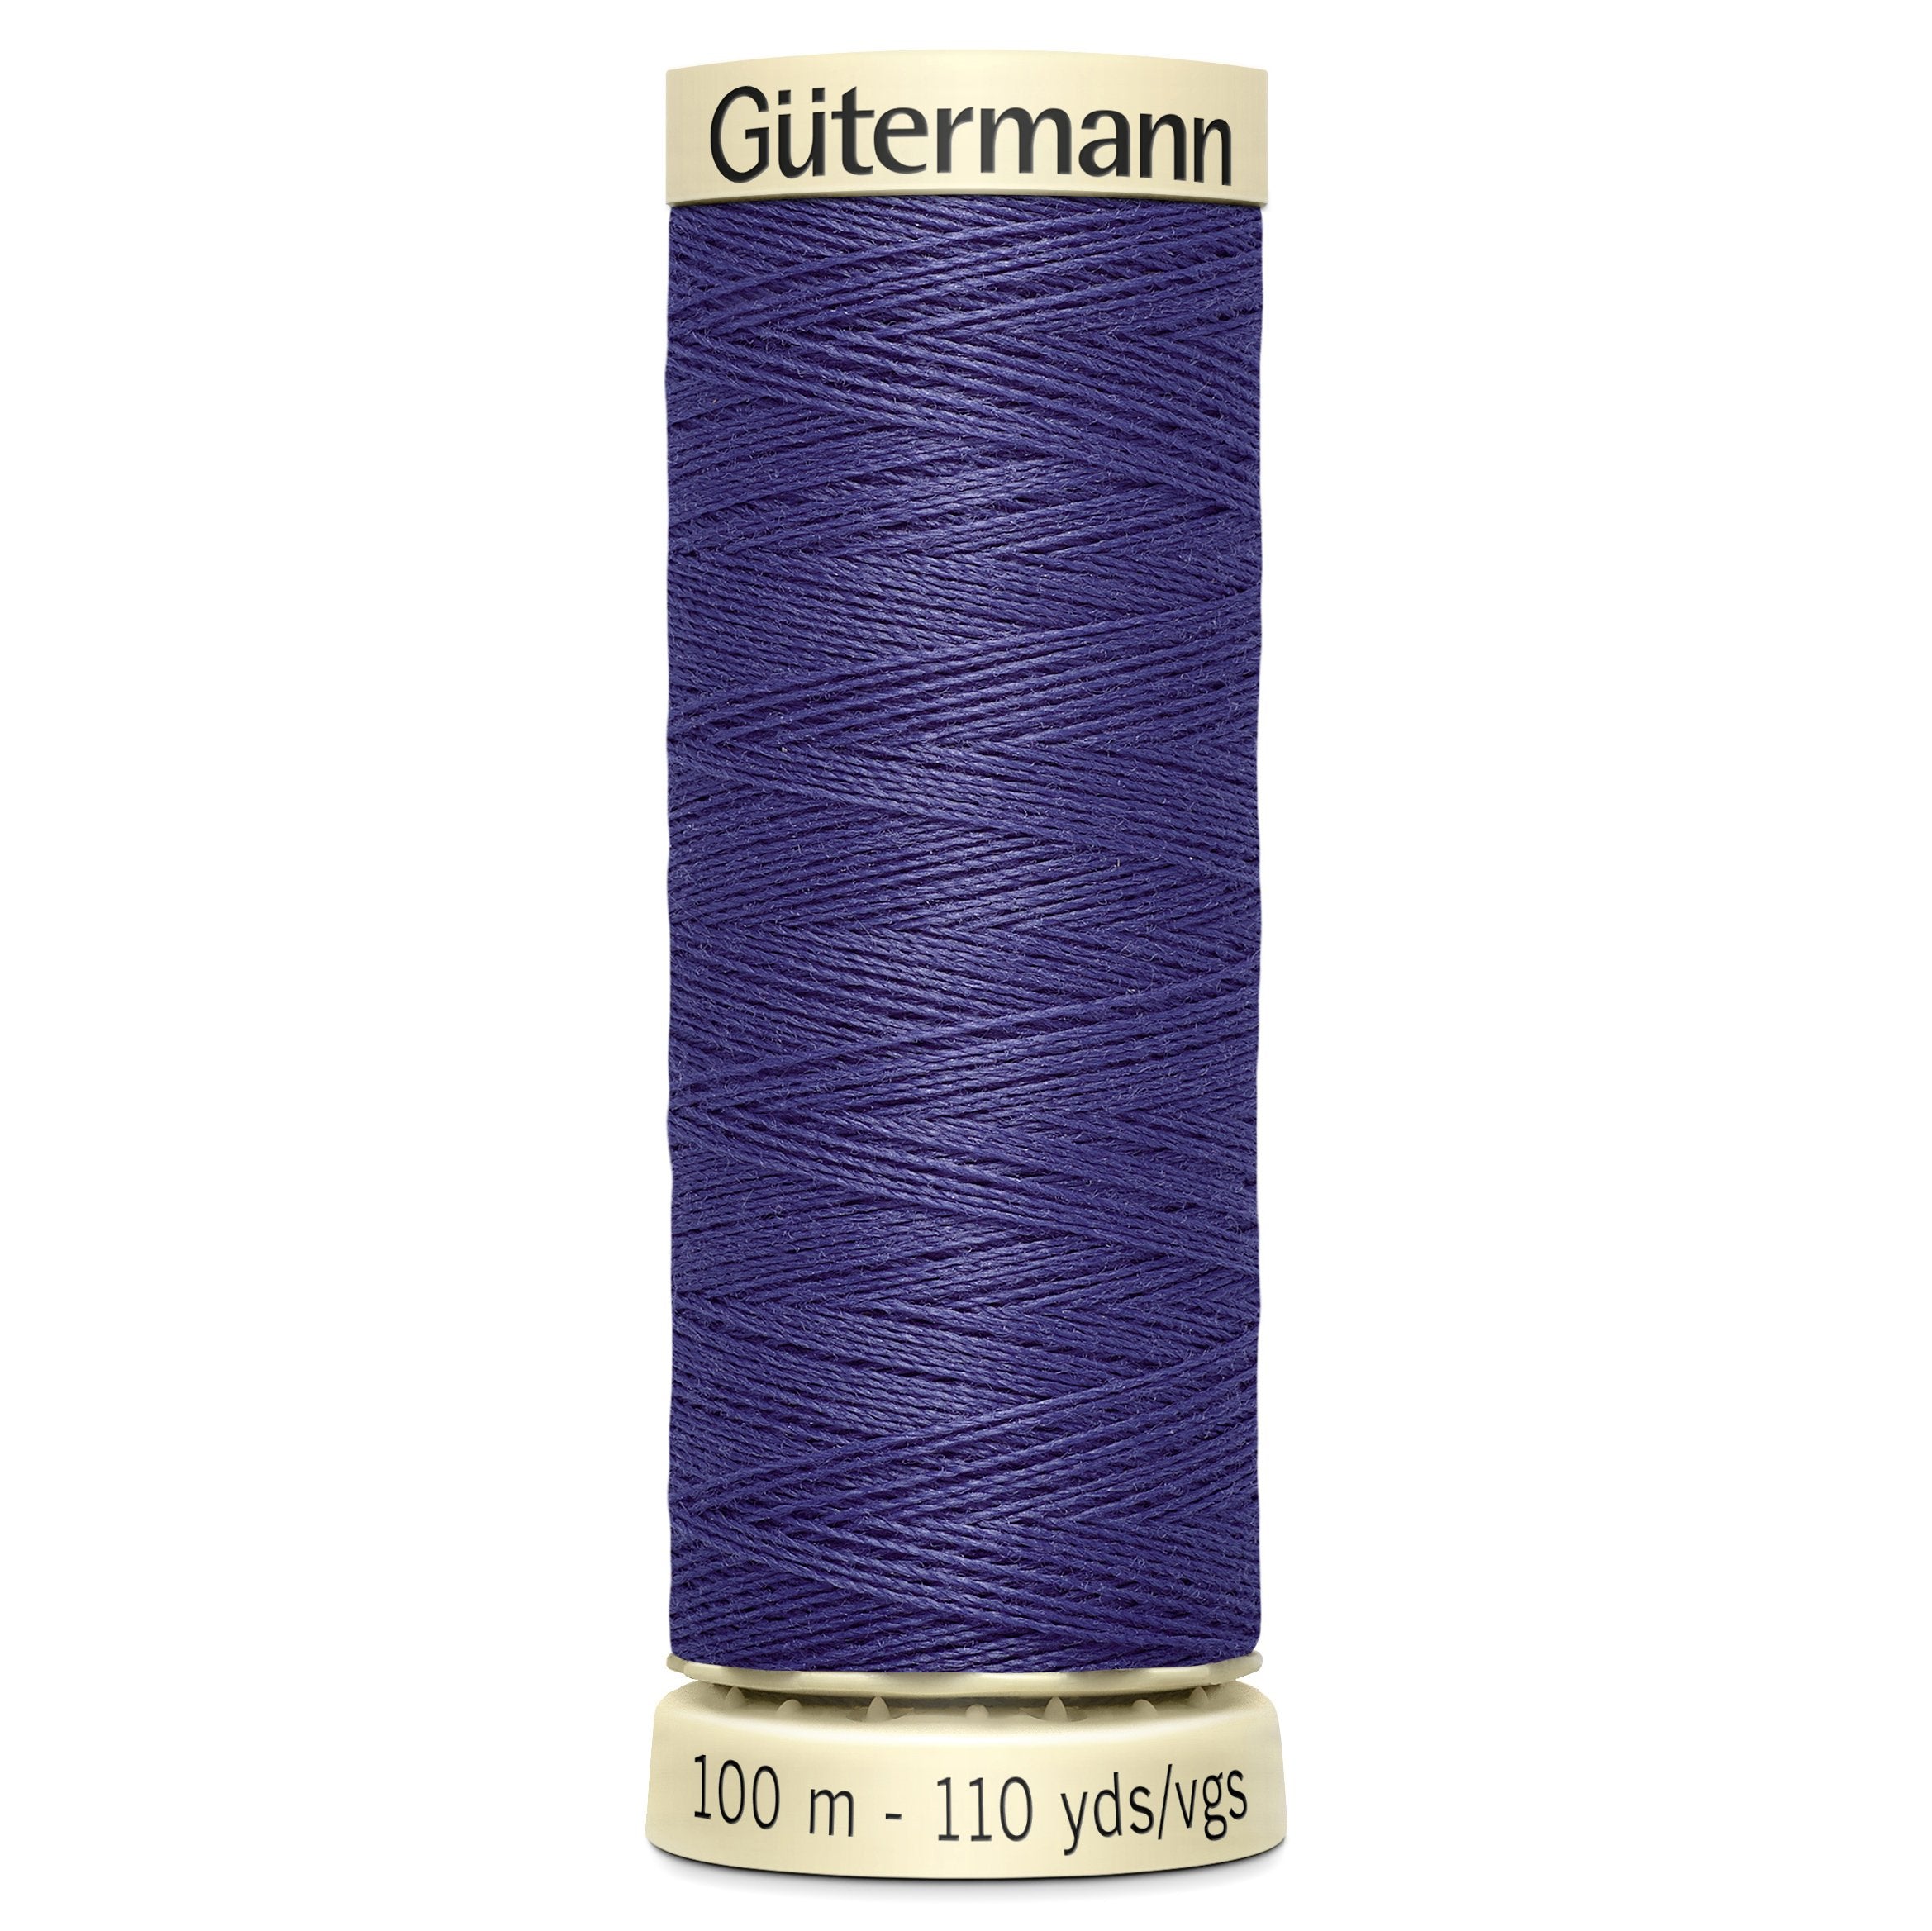 Gutermann Sew All Thread colour 86 Violet Blue from Jaycotts Sewing Supplies